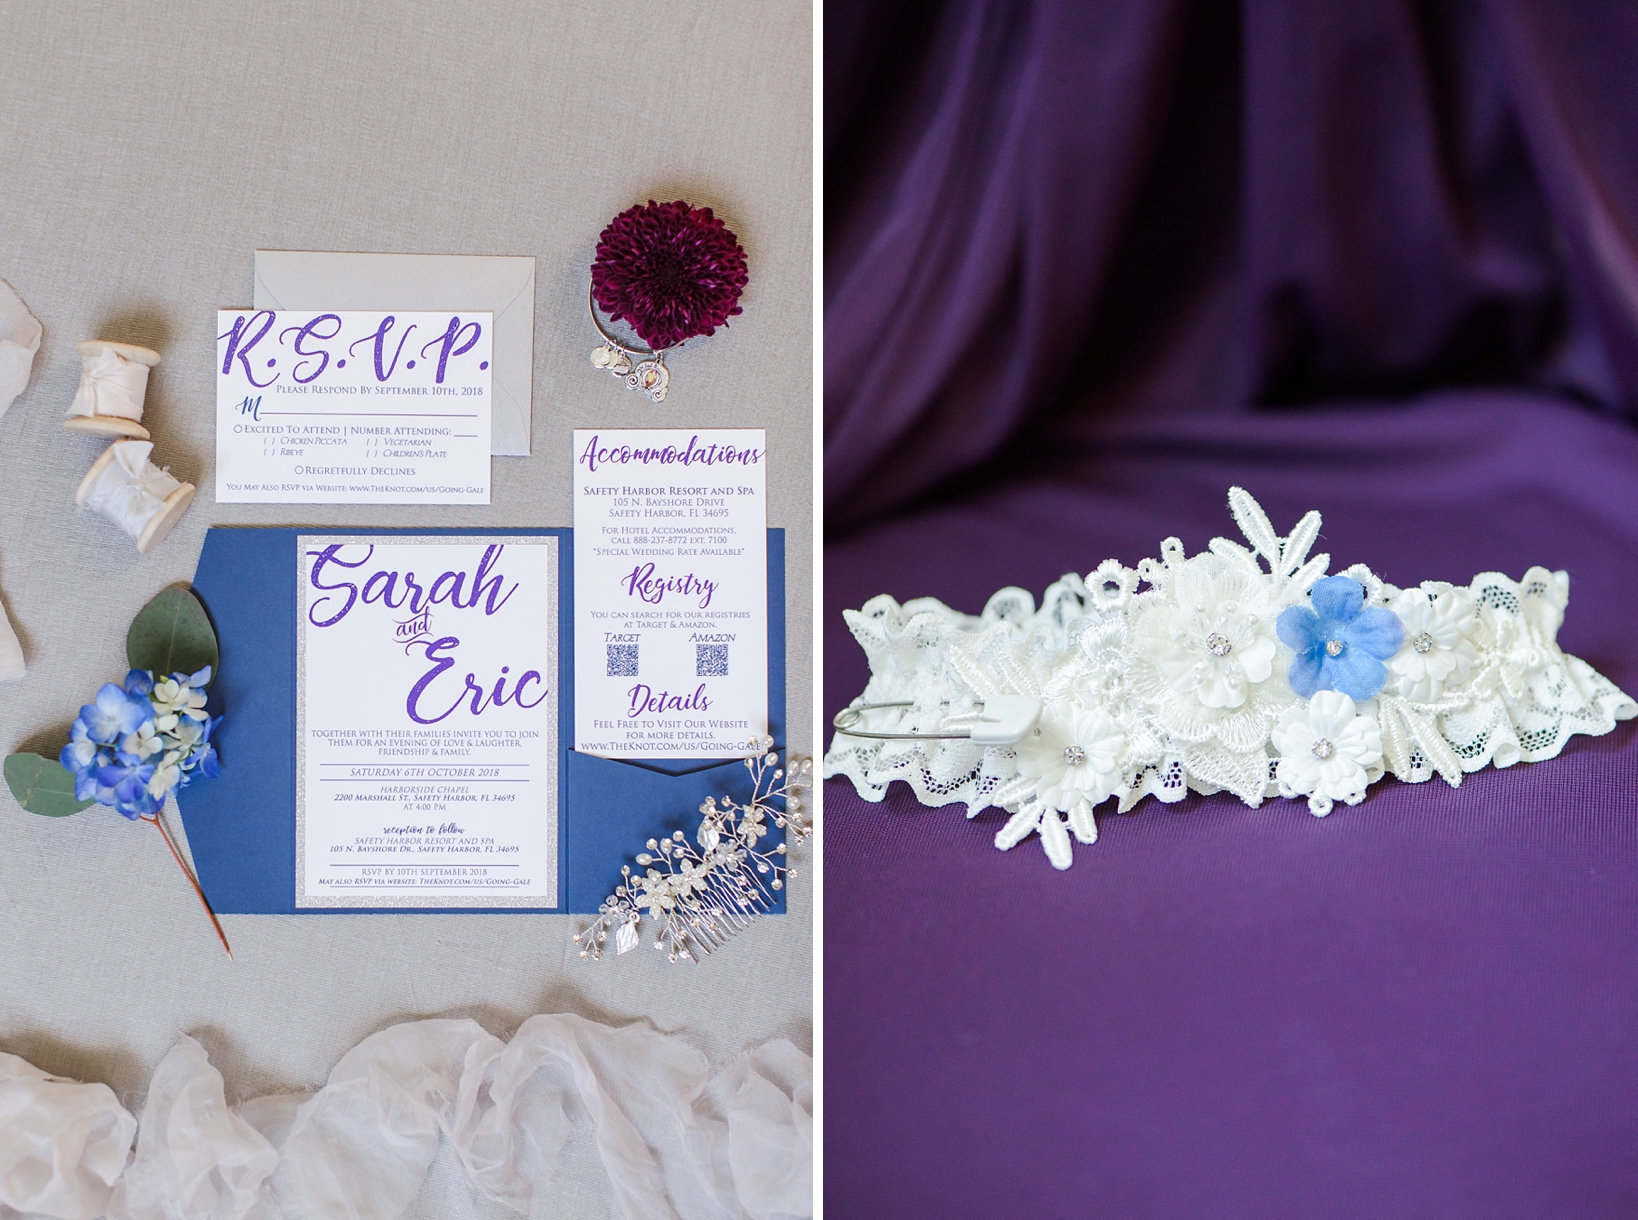 The wedding invitation suite with pops of purple and navy by Sarah & Ben Photography